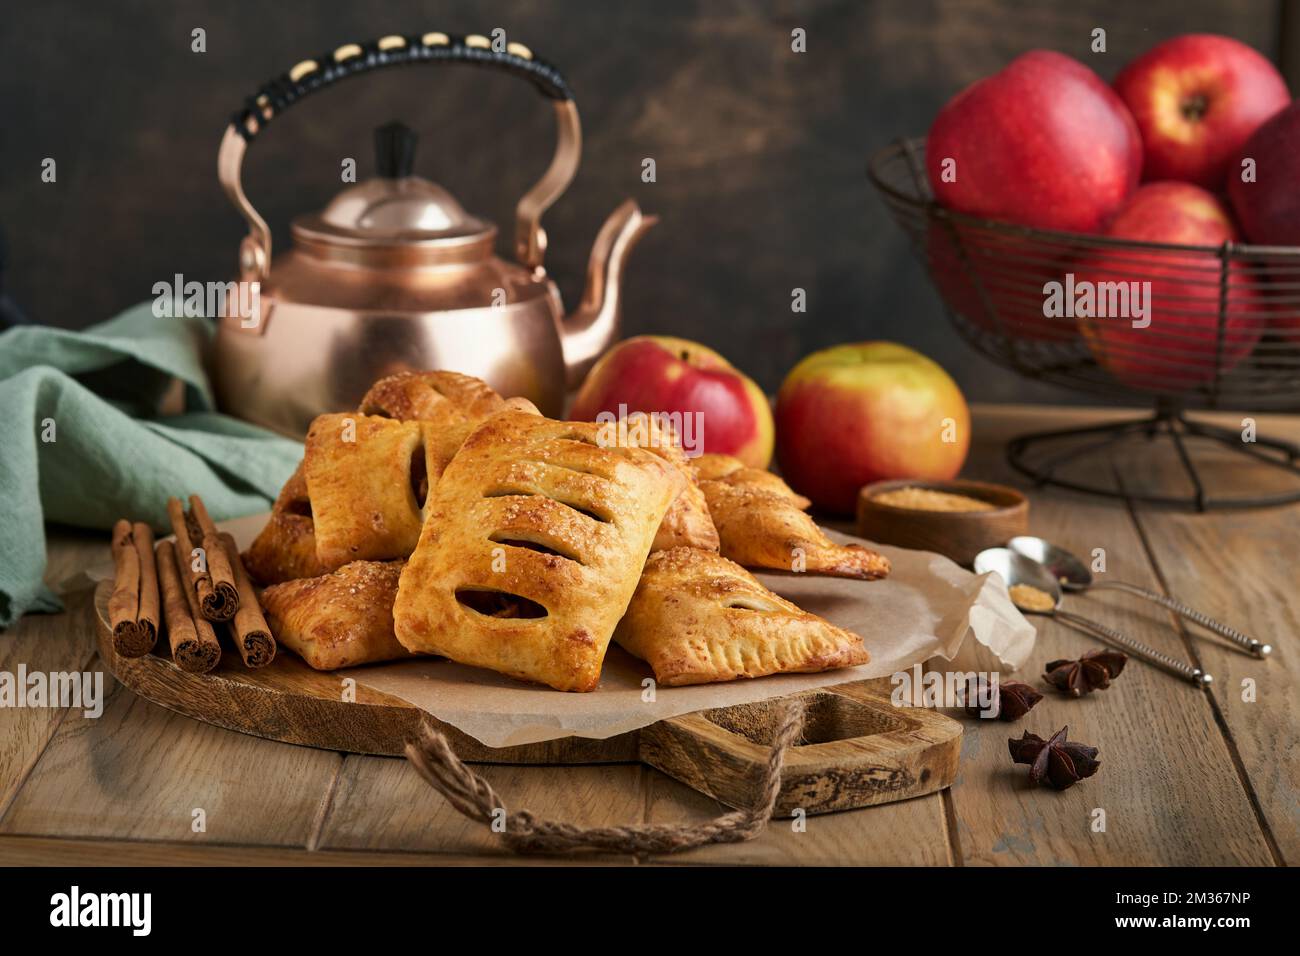 Hand pies. Mini puff pastry or hand pies stuffed with apple and sprinkle sugar powder in wooden plate. Homemade pie snack with crust for breakfast rus Stock Photo